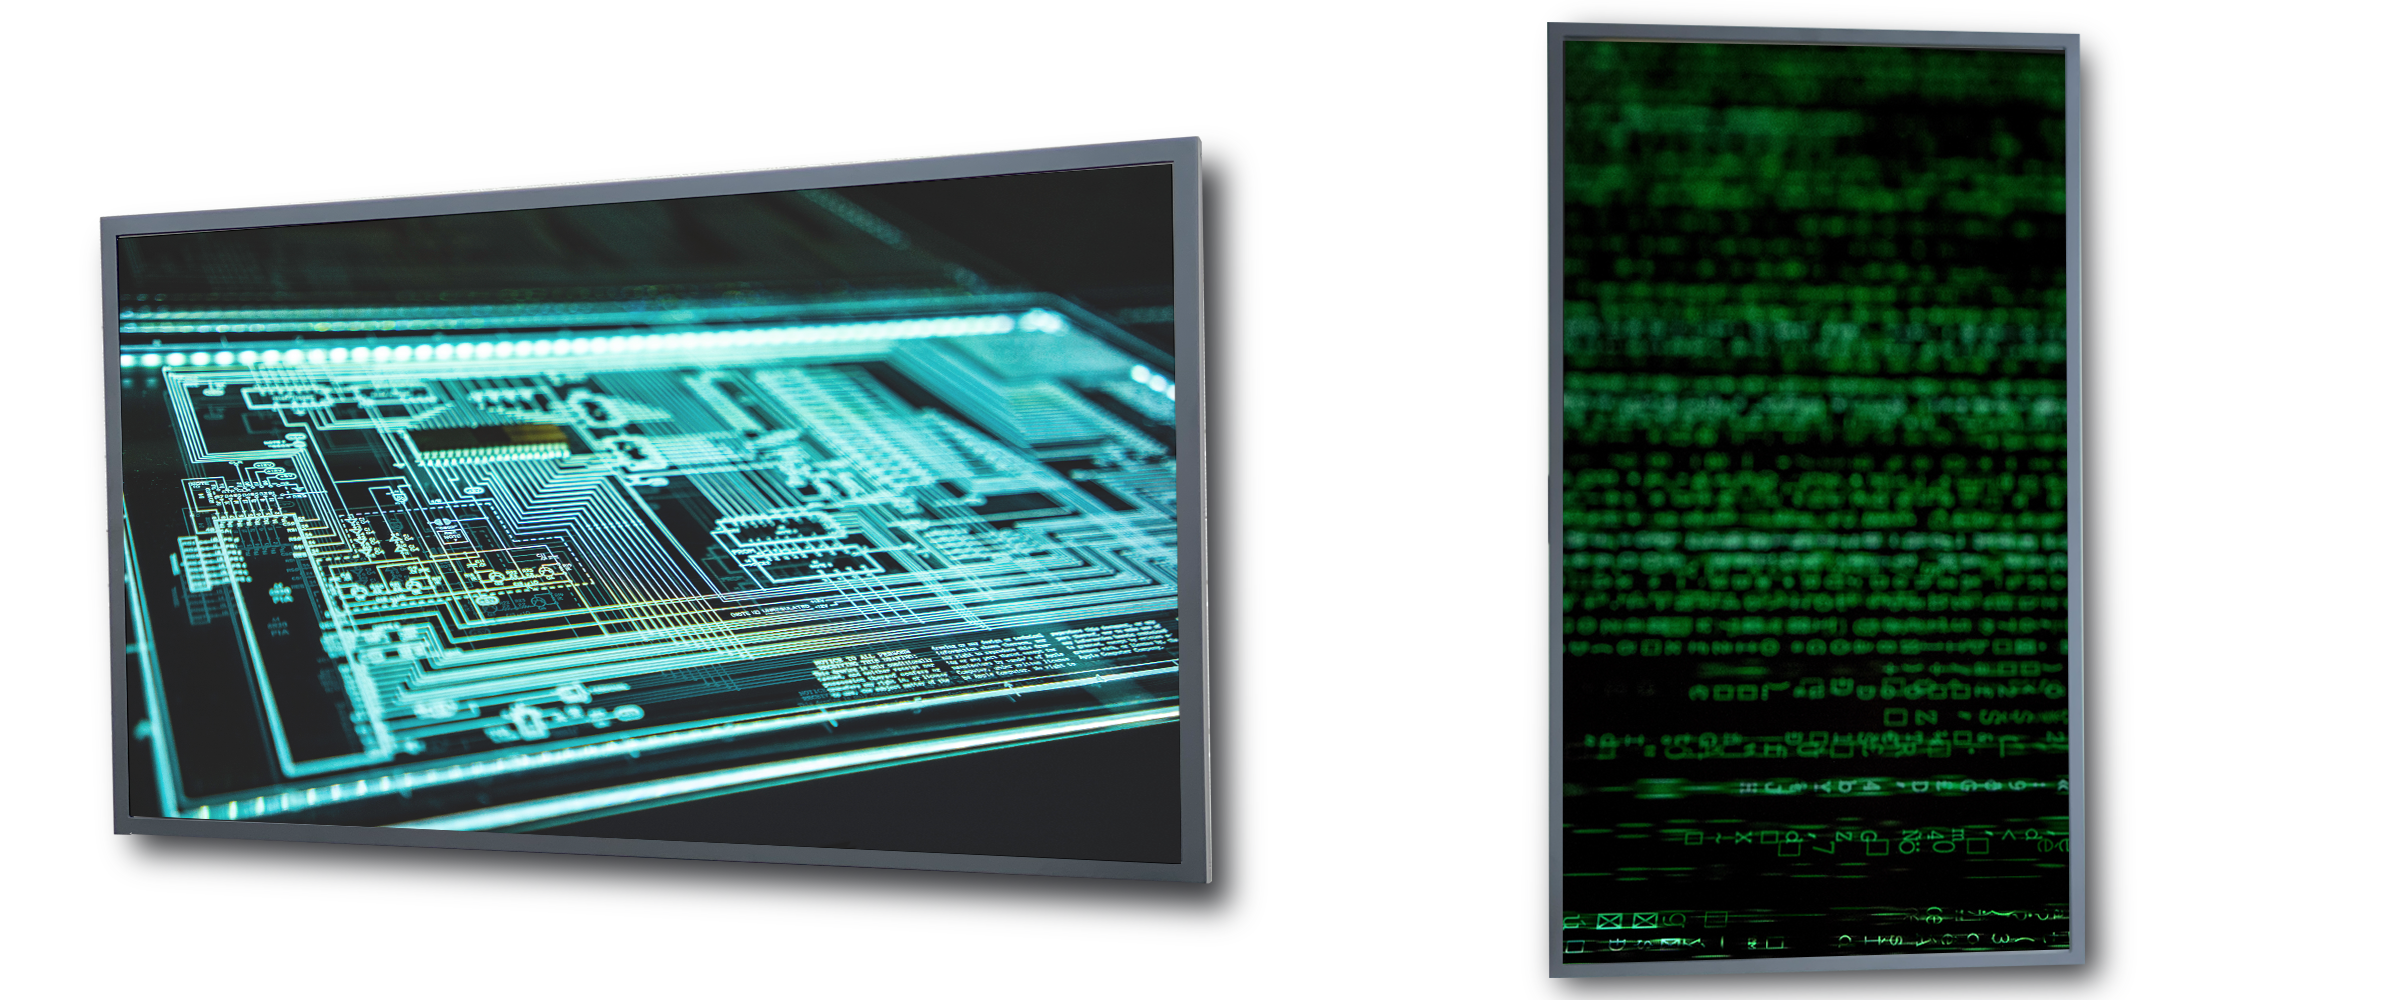 Two secure-ready commercial displays side-by-side. One display is in portrait mode and the other one is in landscape mode. Both have cybersecurity themed backgrounds.